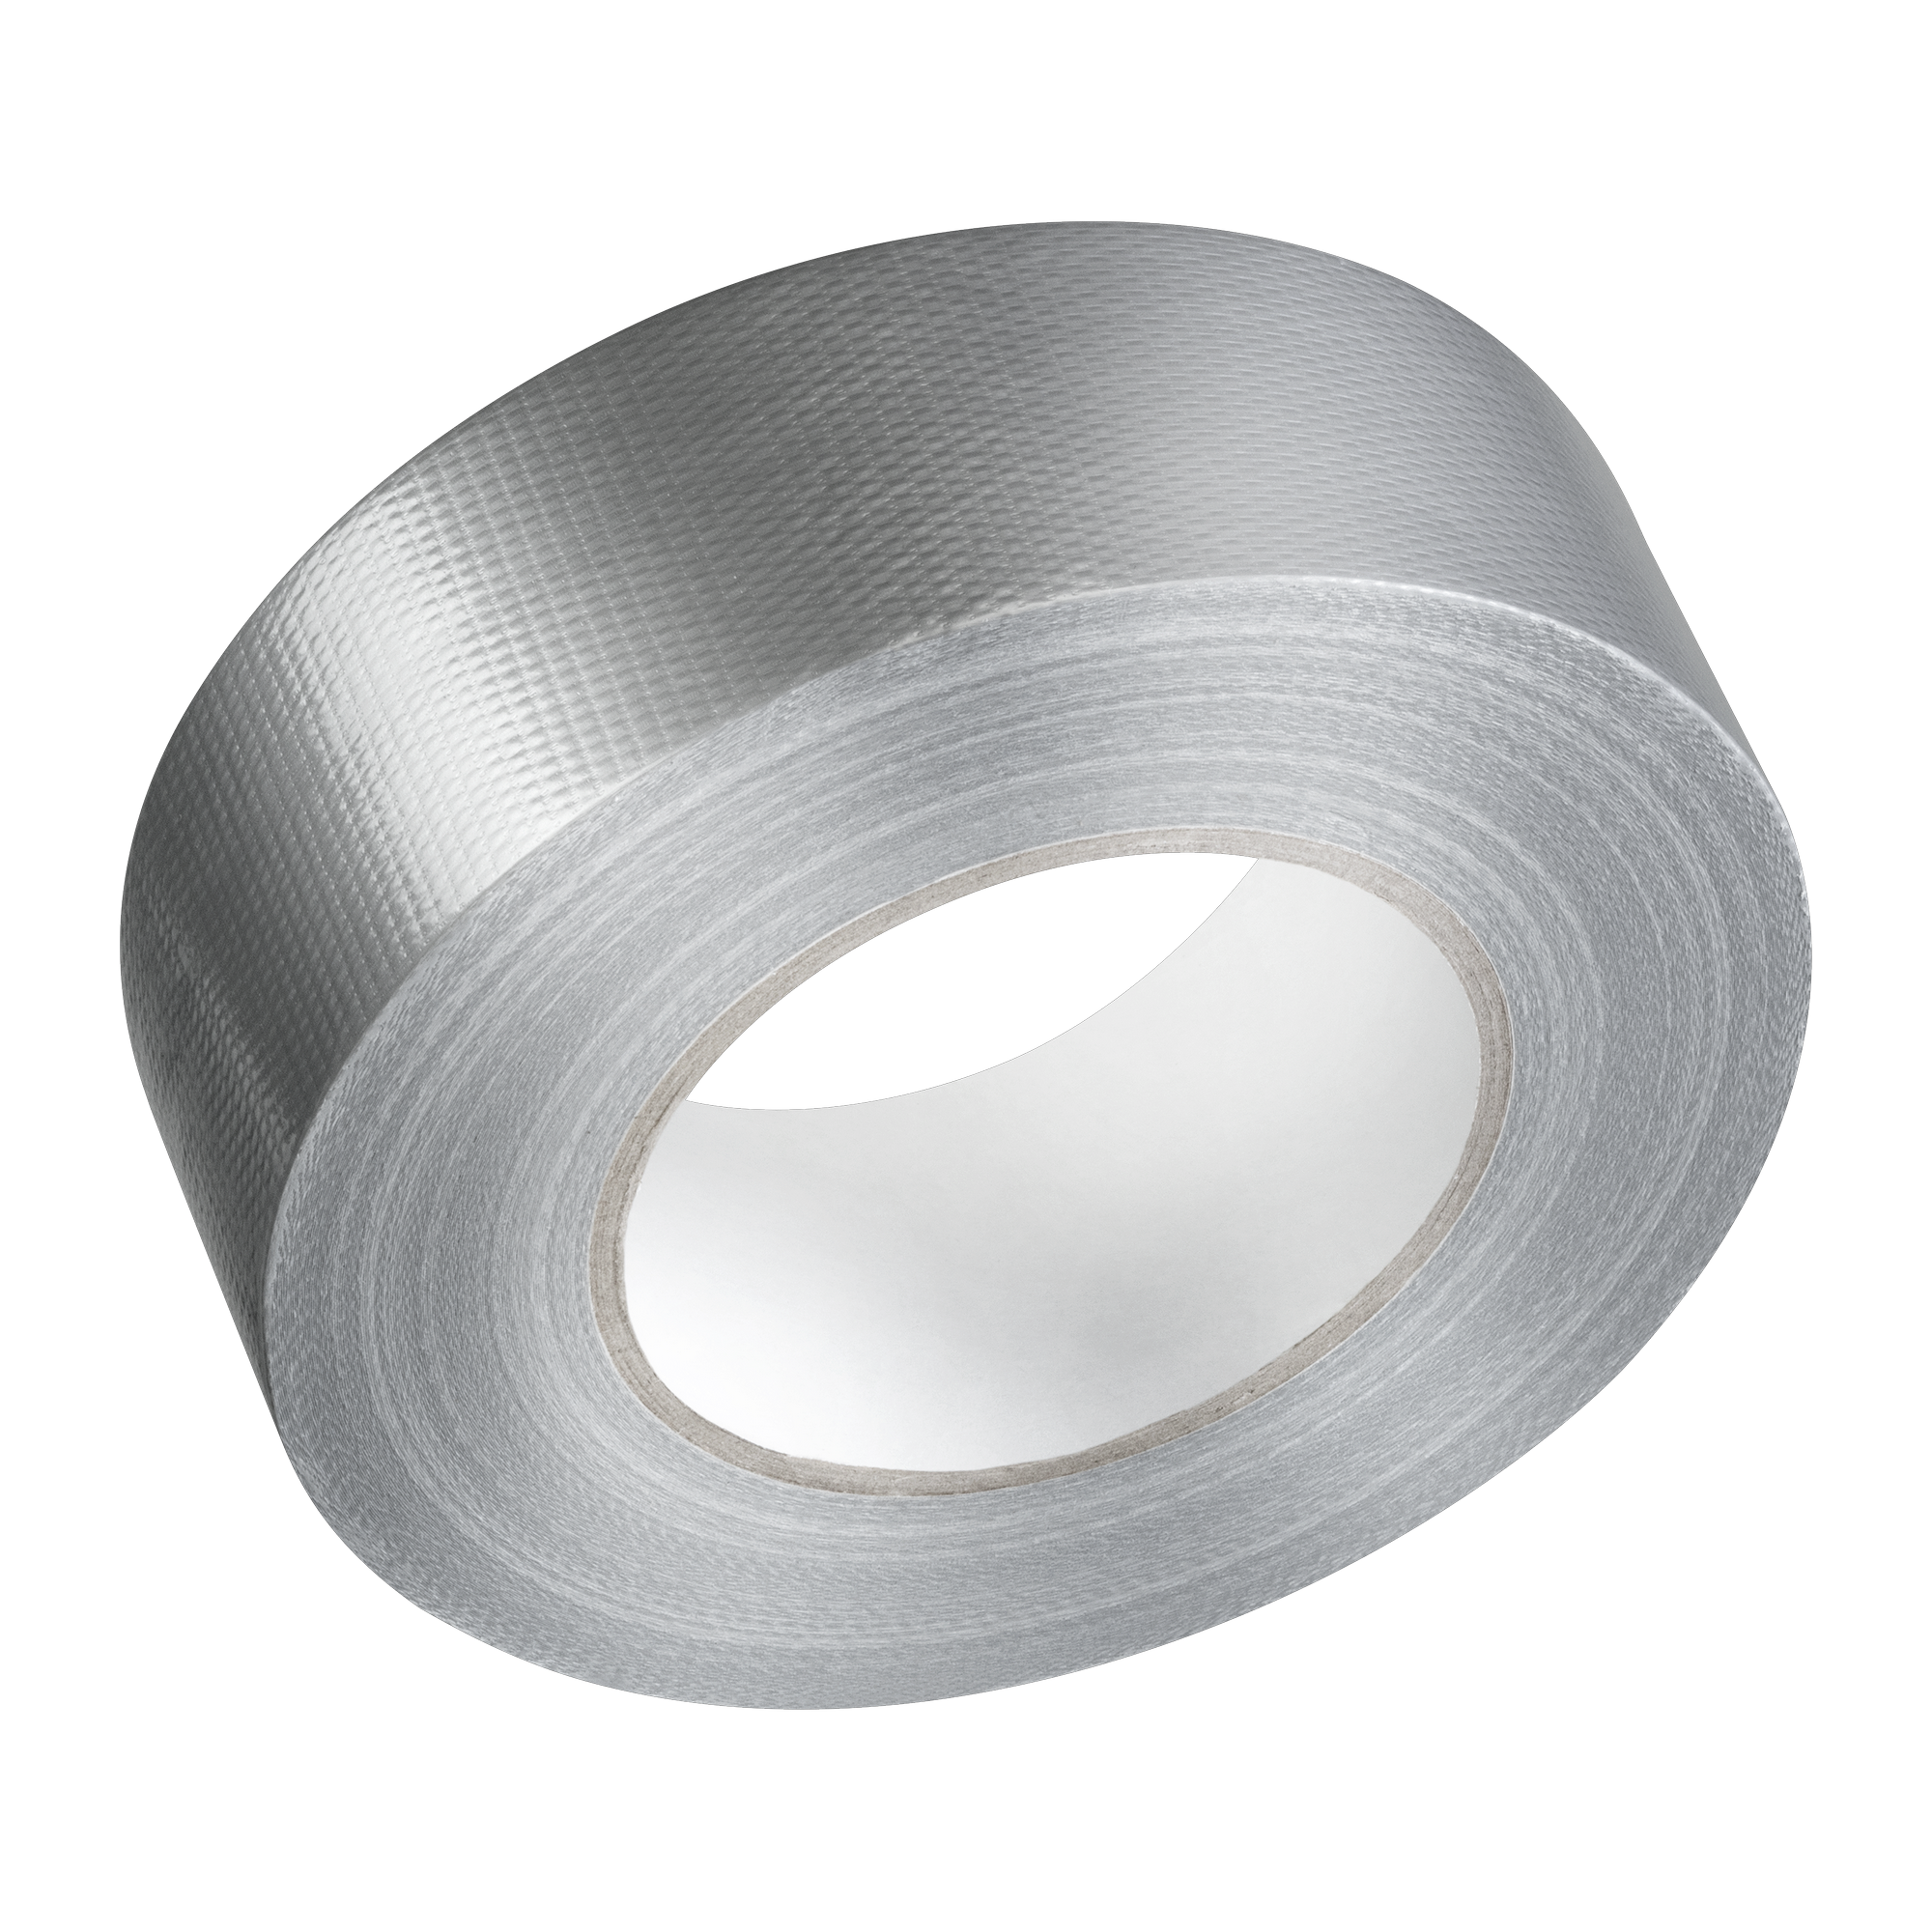 Reparaturband silber 50 mm x 50 m + product picture